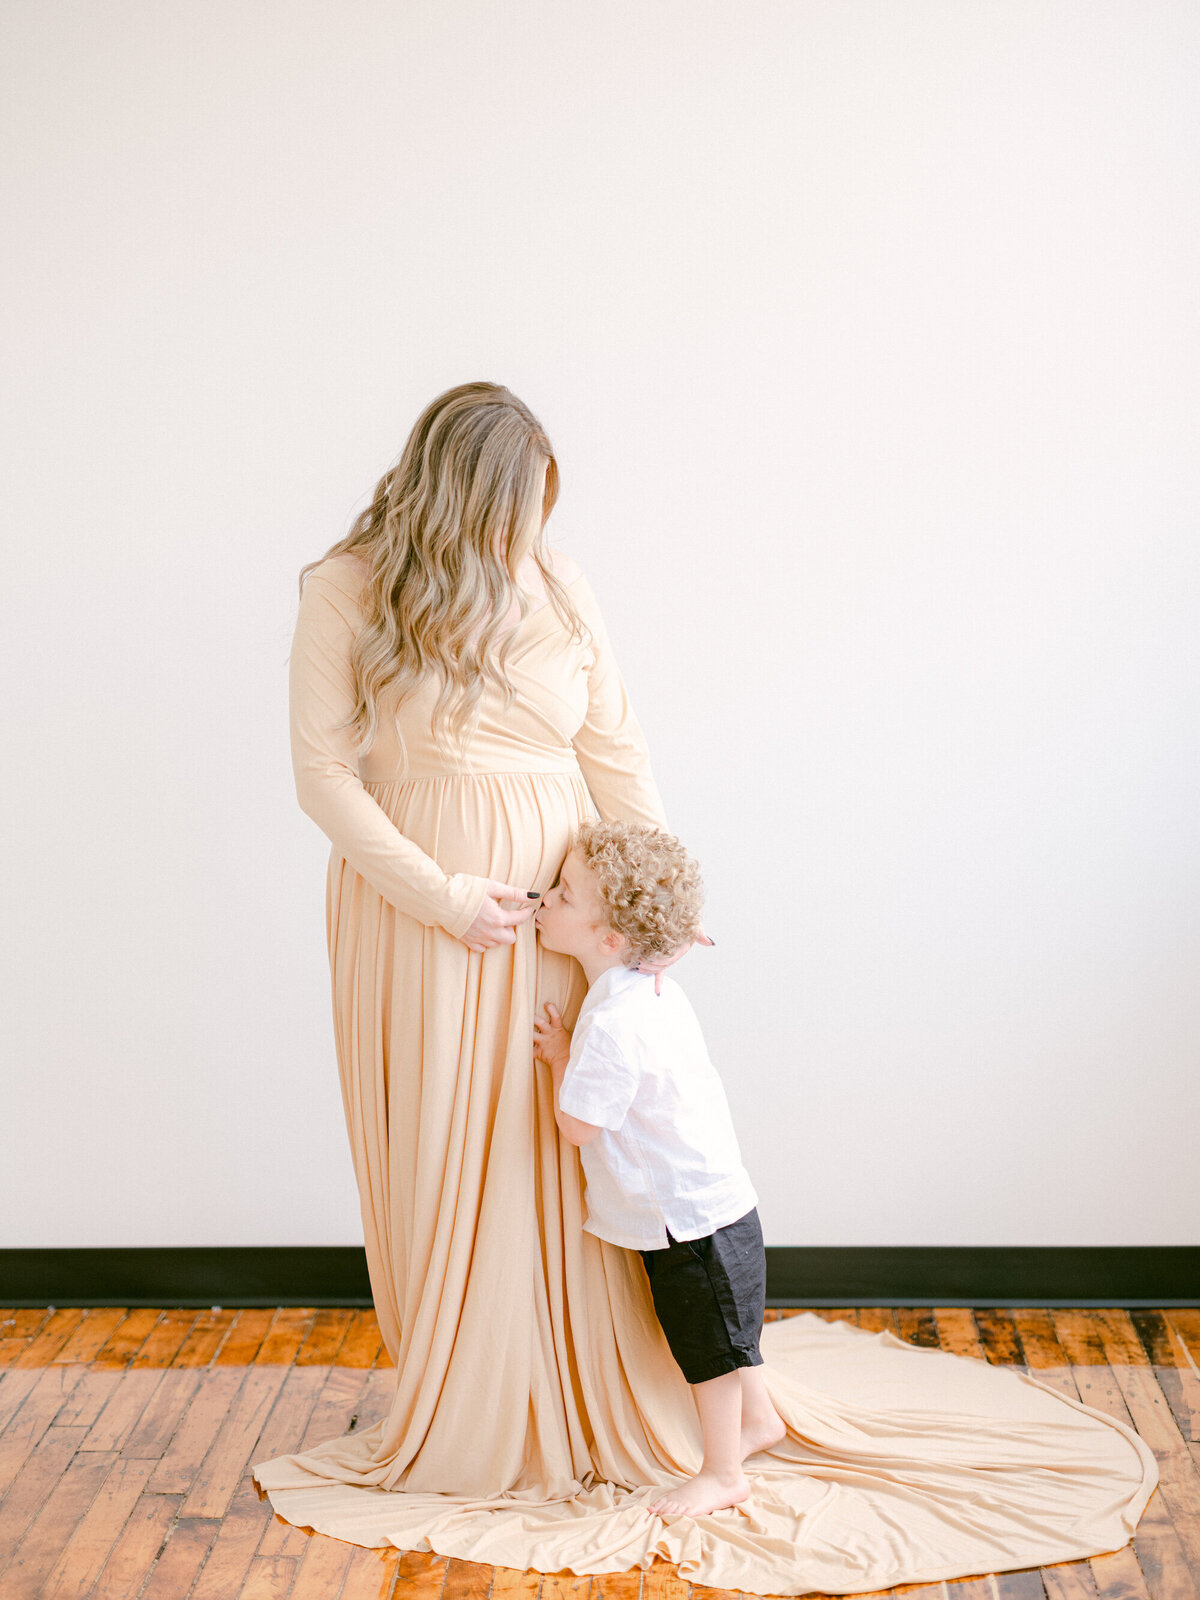 ct-maternity-session-photo-rental-studio-the-apiary-co-14